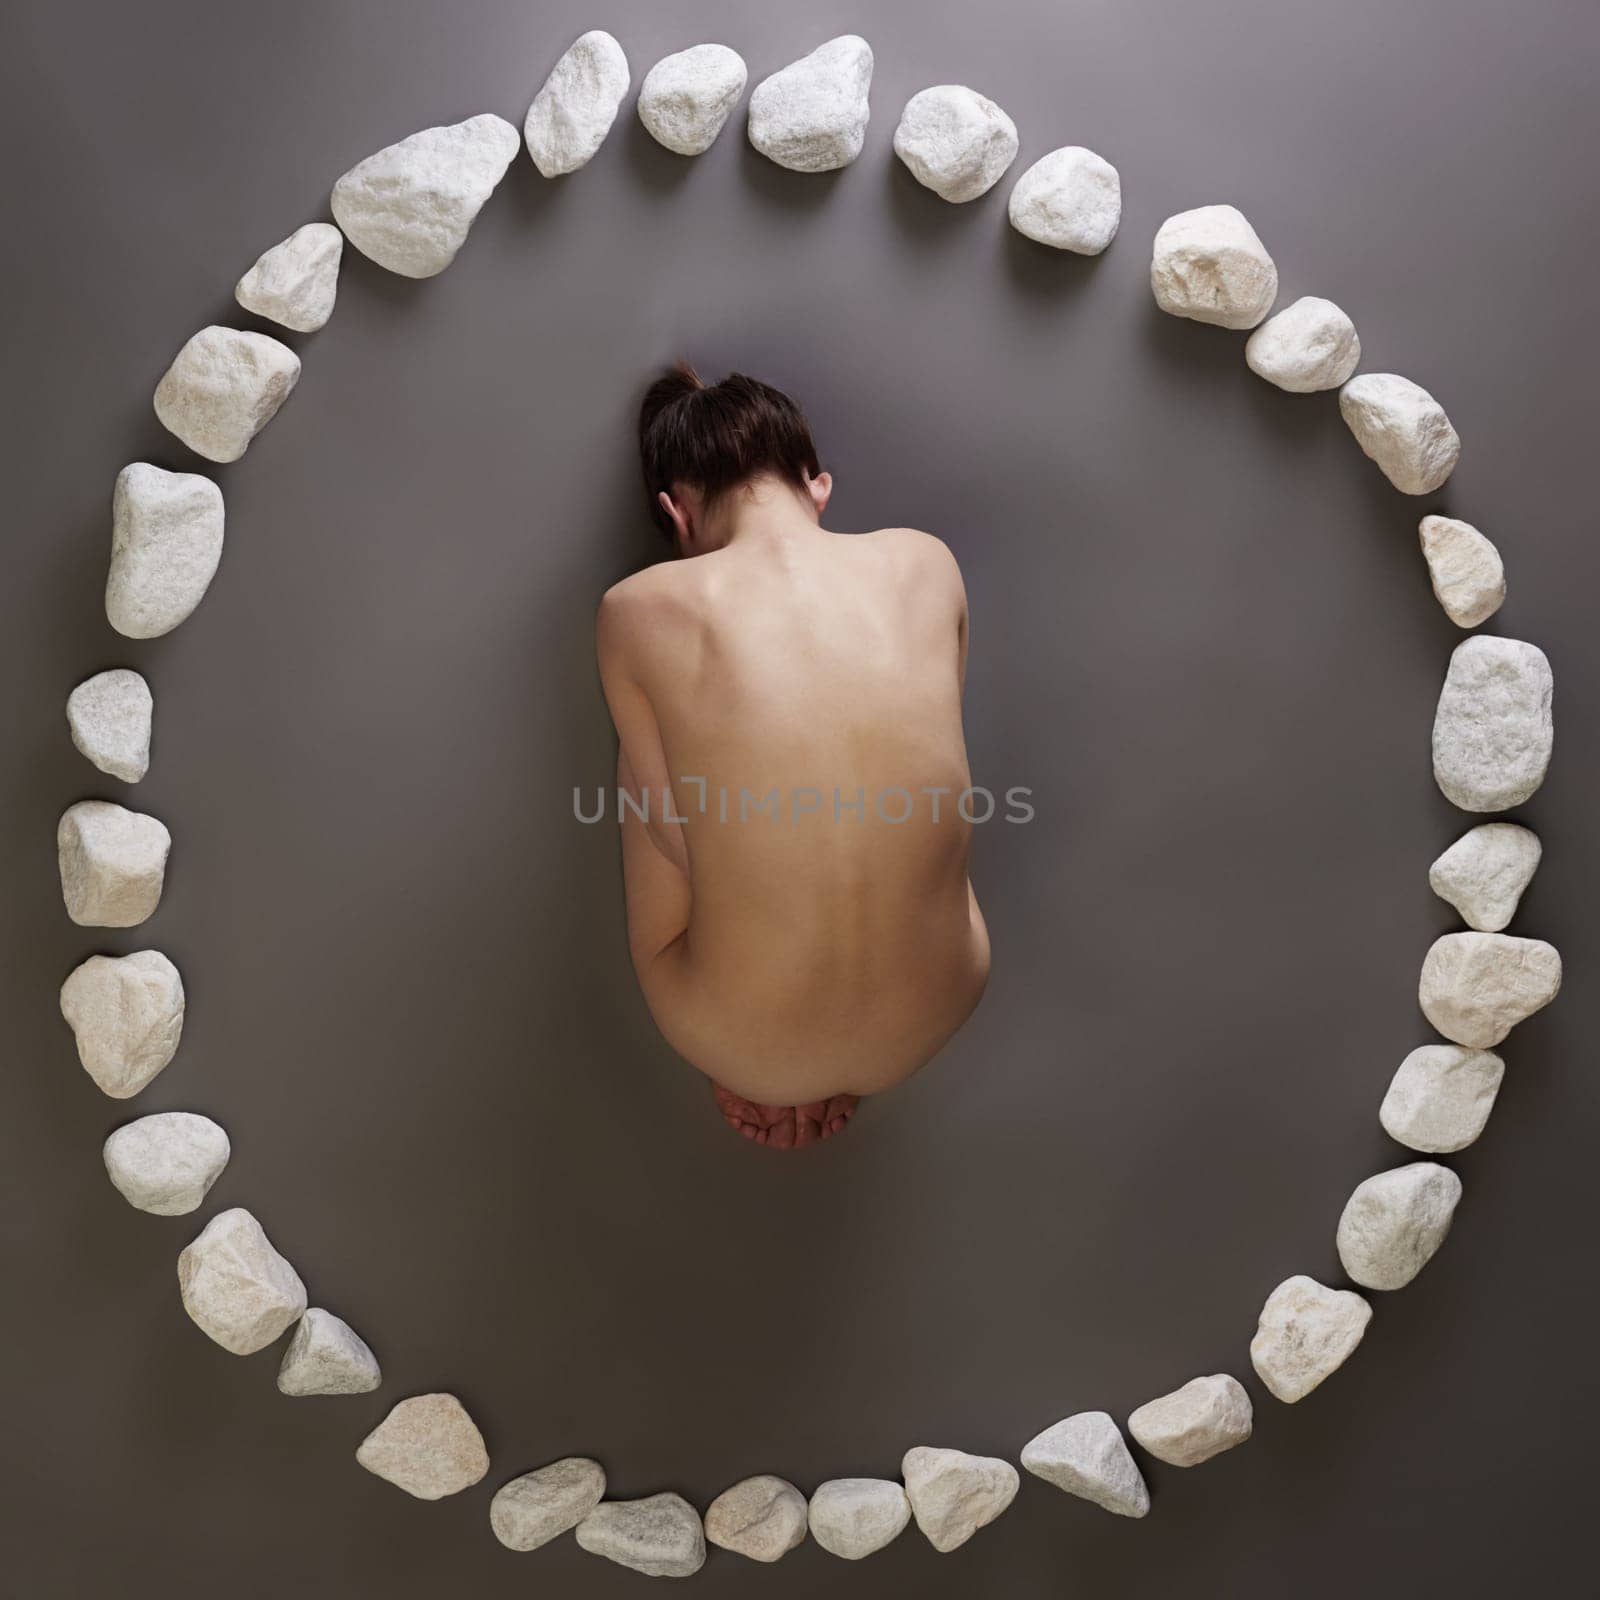 Naked girl lying in circle of stones. Top view by rivertime